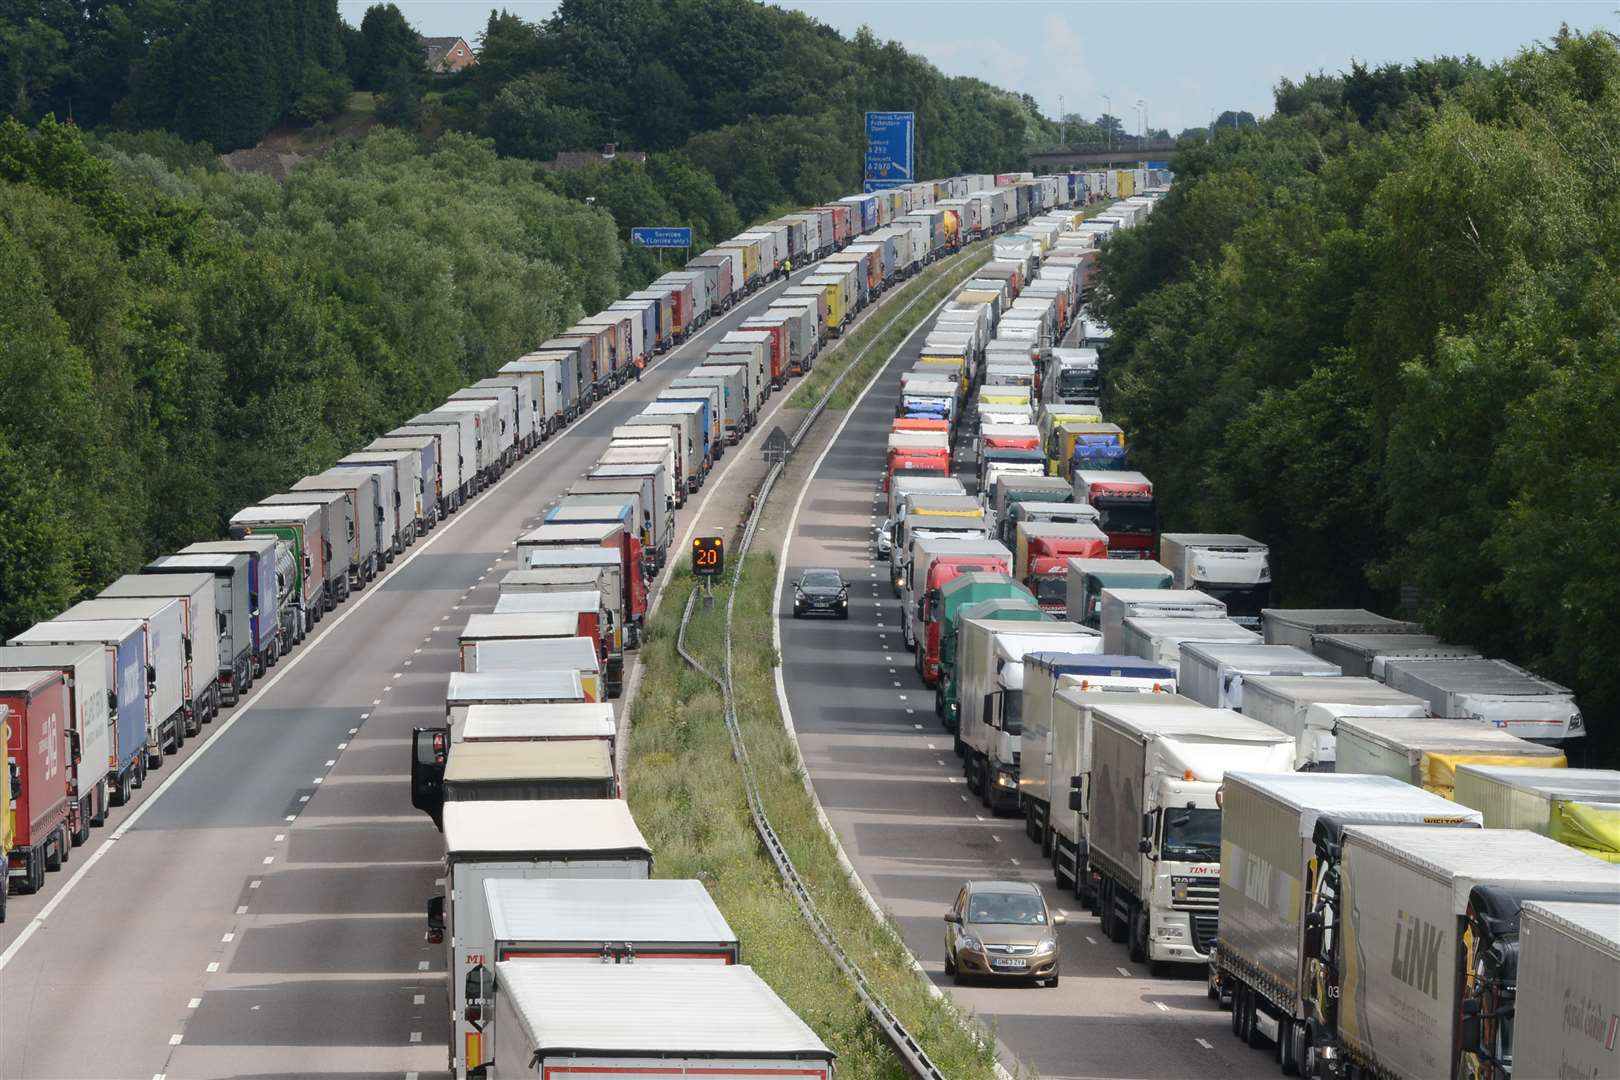 Operation Stack between Junction 9 and 10 of the M20. Library image.